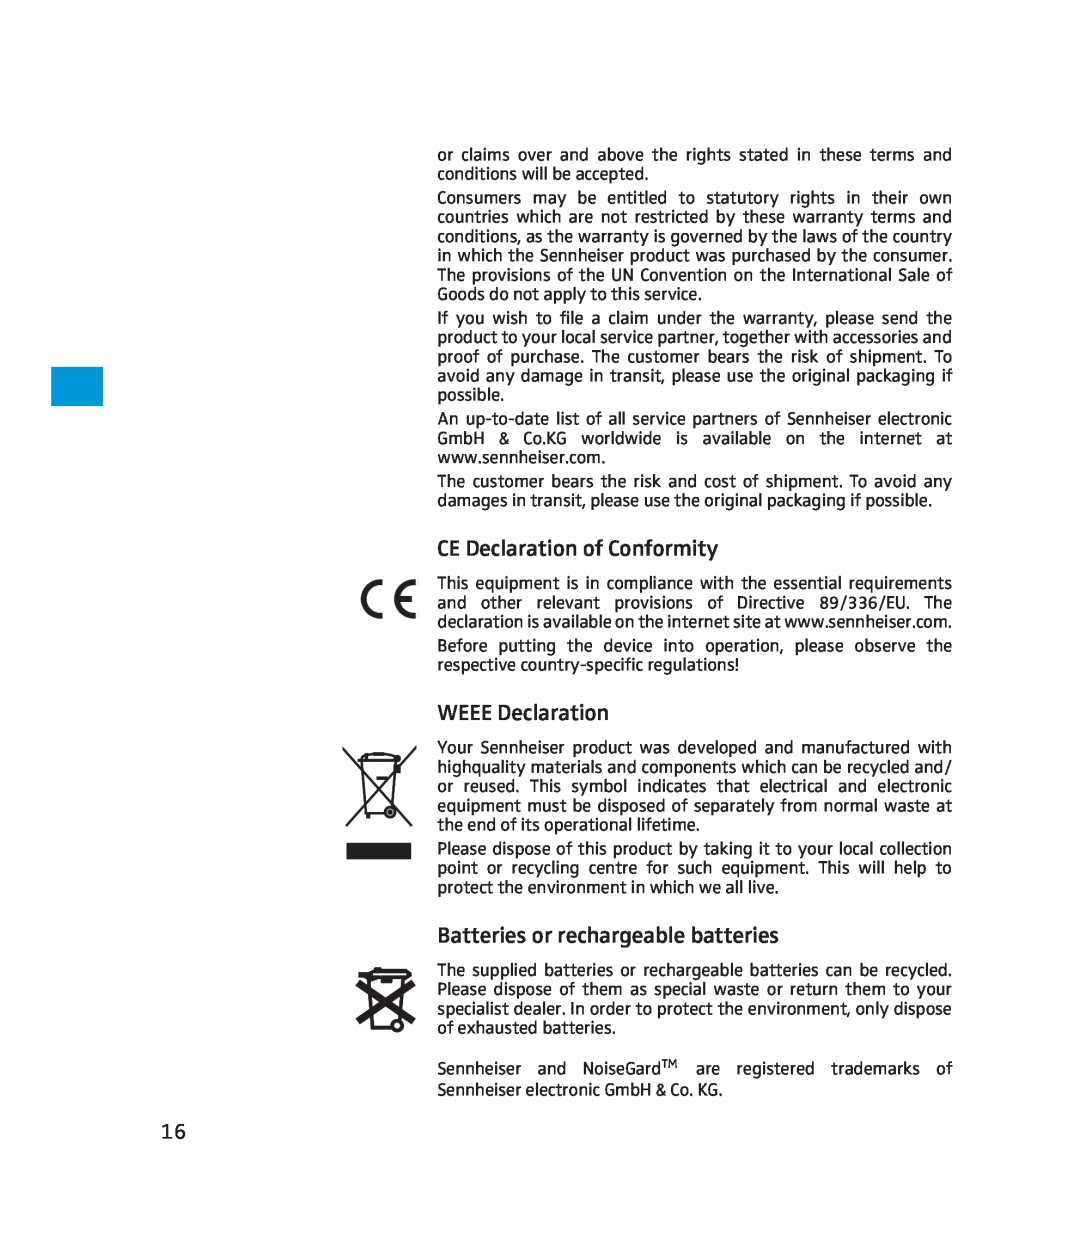 Sennheiser PXC 350 instruction manual CE Declaration of Conformity, WEEE Declaration, Batteries or rechargeable batteries 